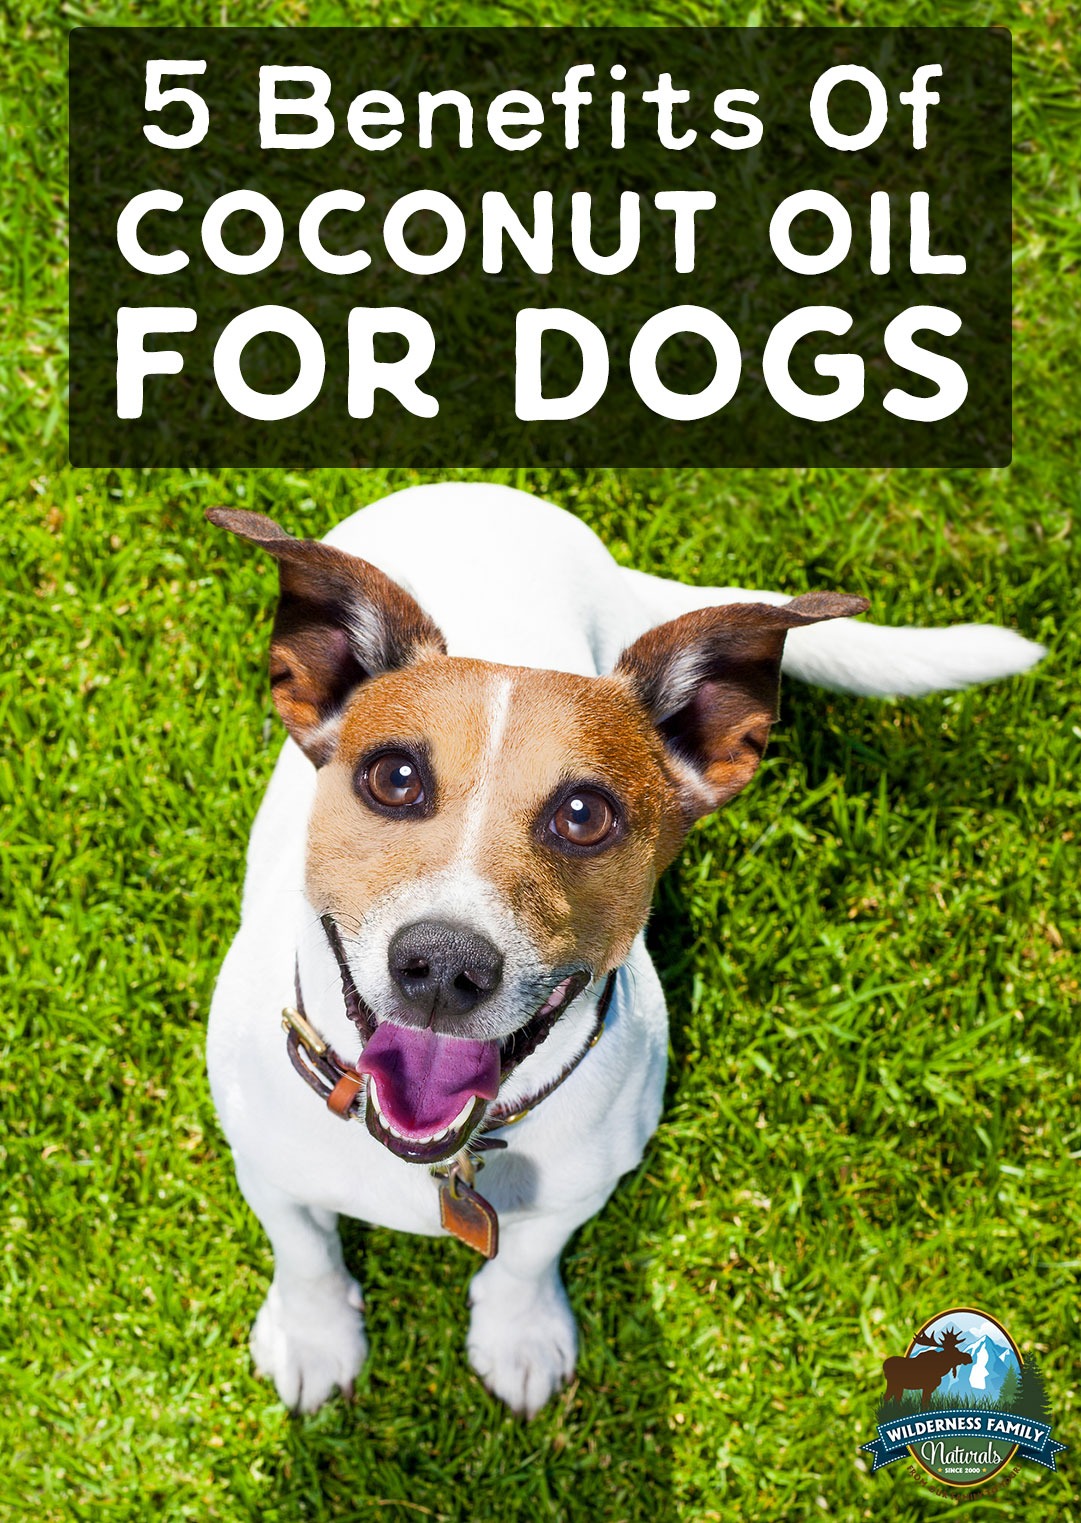 5 Benefits Of Coconut Oil For Dogs | Coconut oil may help maintain clean teeth, shiny fur, and overall good health for your beloved puppy. It's not a magic bullet, but it certainly can add to their overall well-being. Learn about the 5 benefits of coconut oil for dogs! | WildernessFamilyNaturals.com